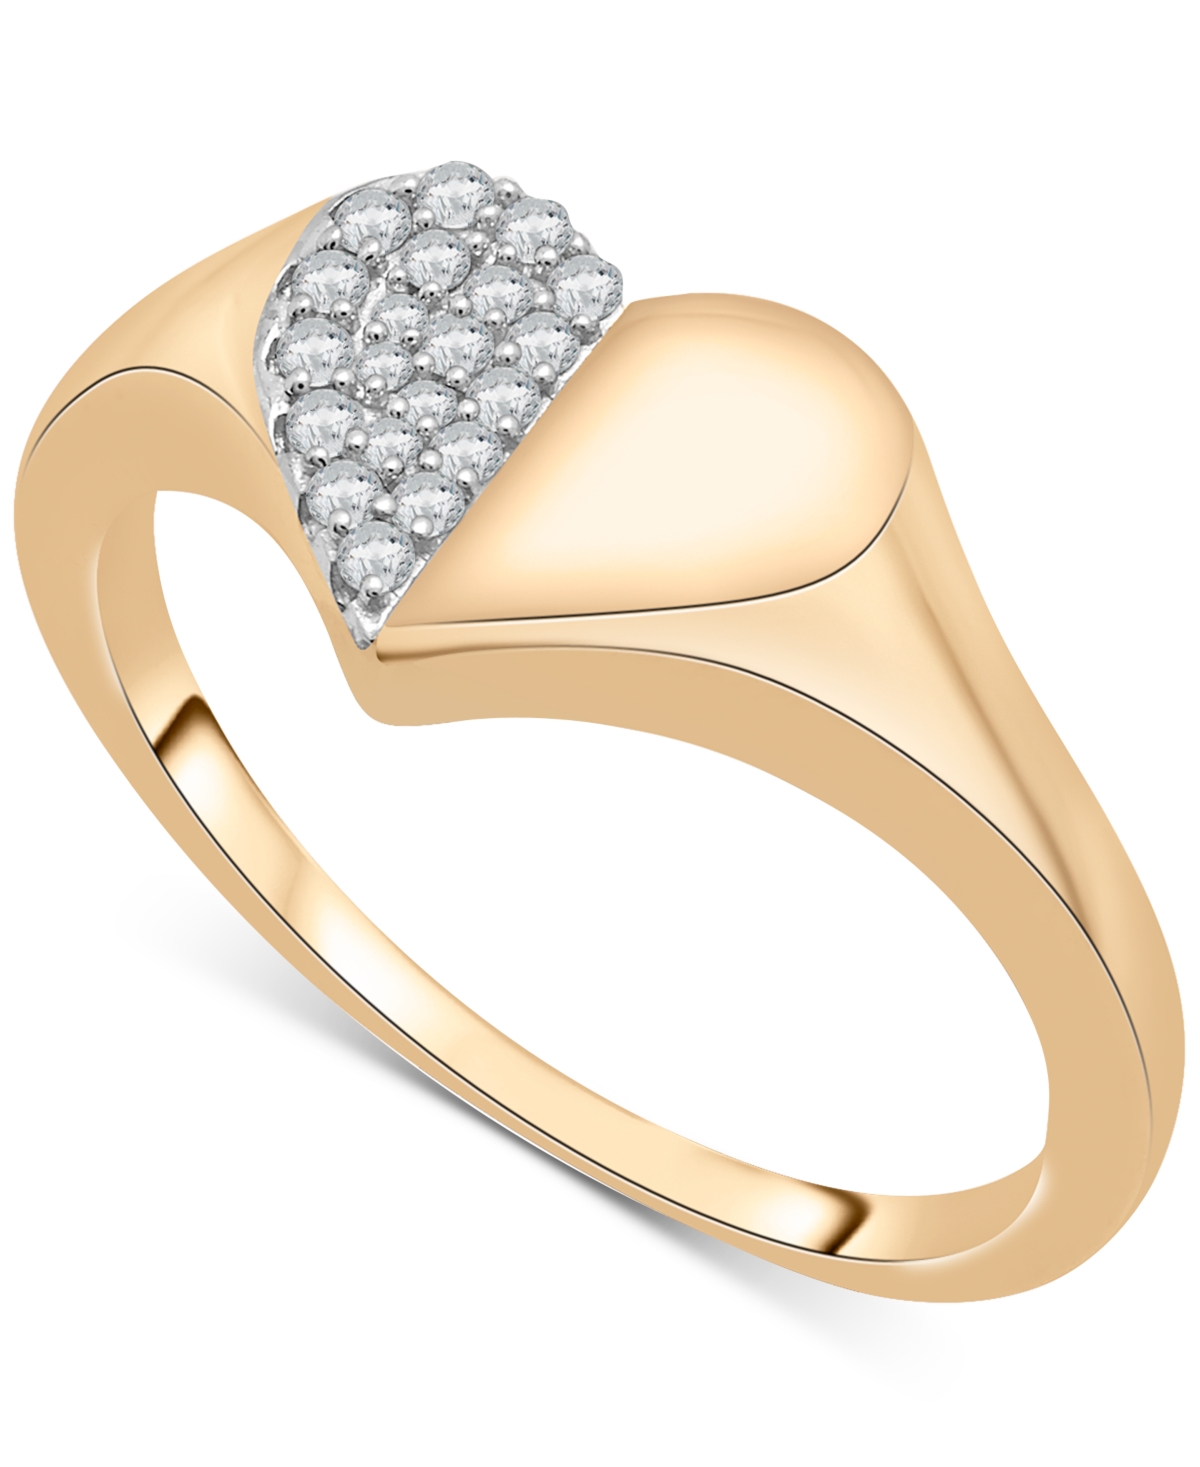 Diamond Half Heart Cluster Ring (1/10 ct. t.w.) in 14k Gold, Created for Macy's - Yellow Gold